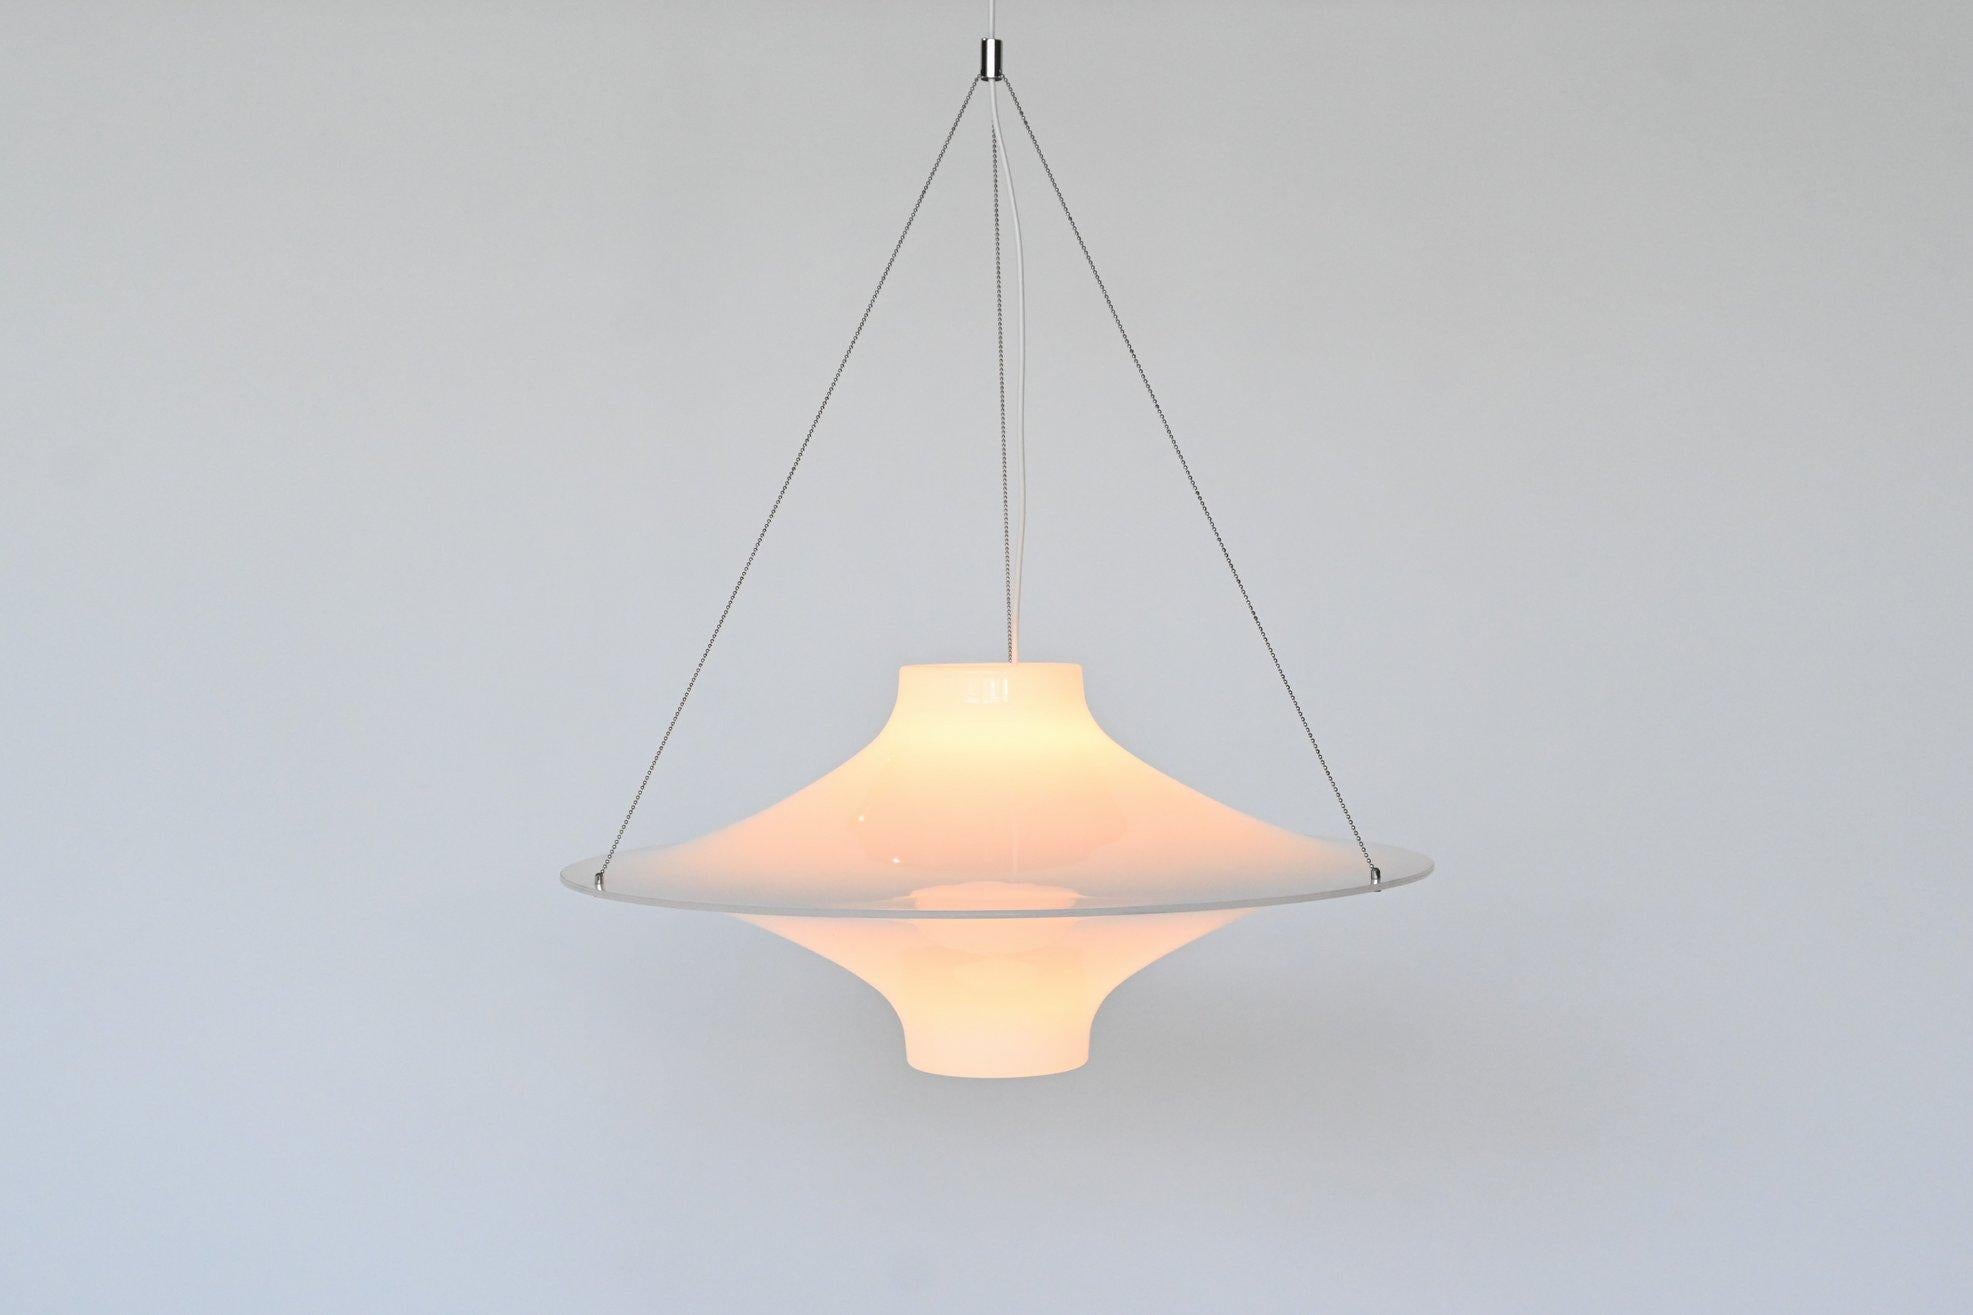 Very nice design classic pendant lamp model “Lokki / Sky Flyer” designed by Yki Nummi for Sanka, Finland 1959. The lamp is made of white and transparent acrylic and has a metal wire. This large size hanging lamp is very atmospheric when lit.